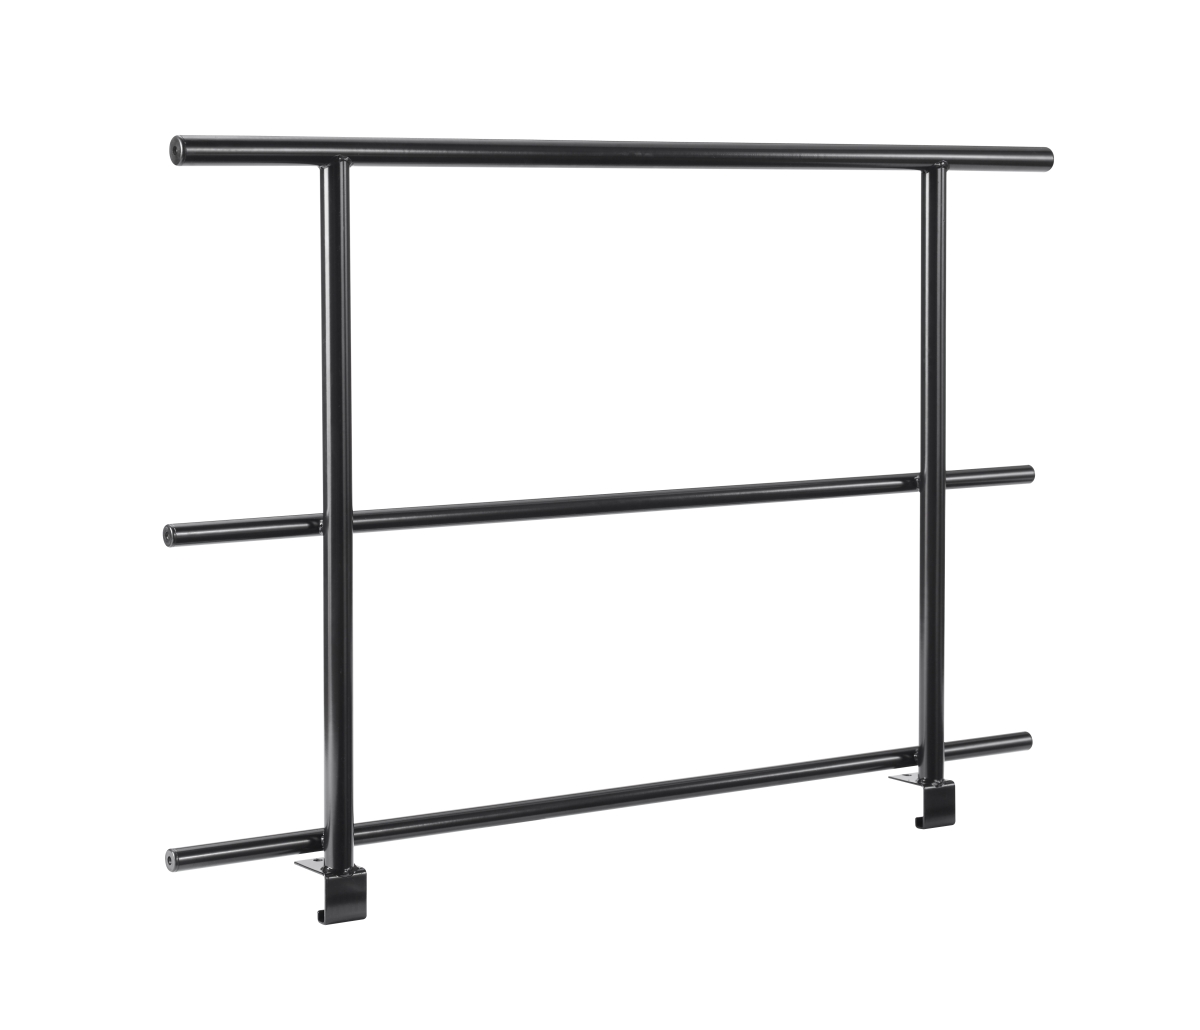 Grs48 48 In. W Guard Rails For Stages